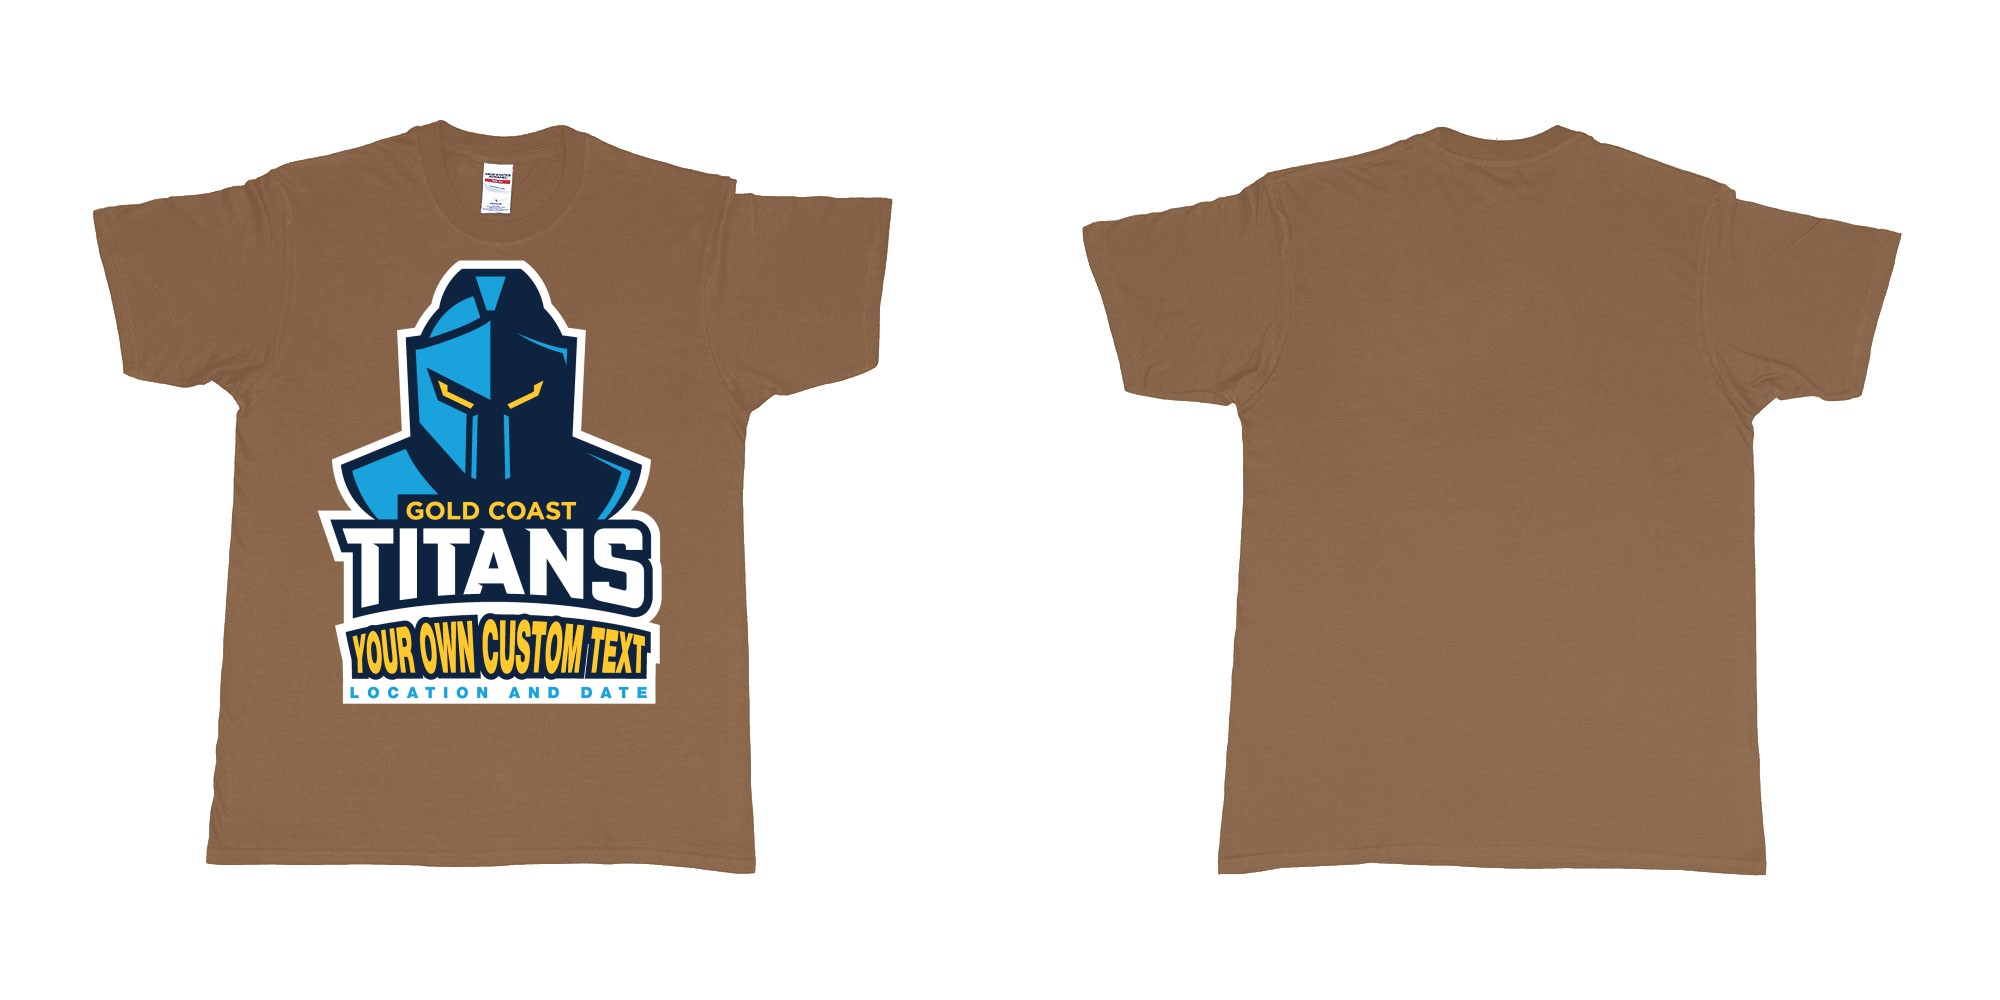 Custom tshirt design gold coast titans own custom design print in fabric color chestnut choice your own text made in Bali by The Pirate Way